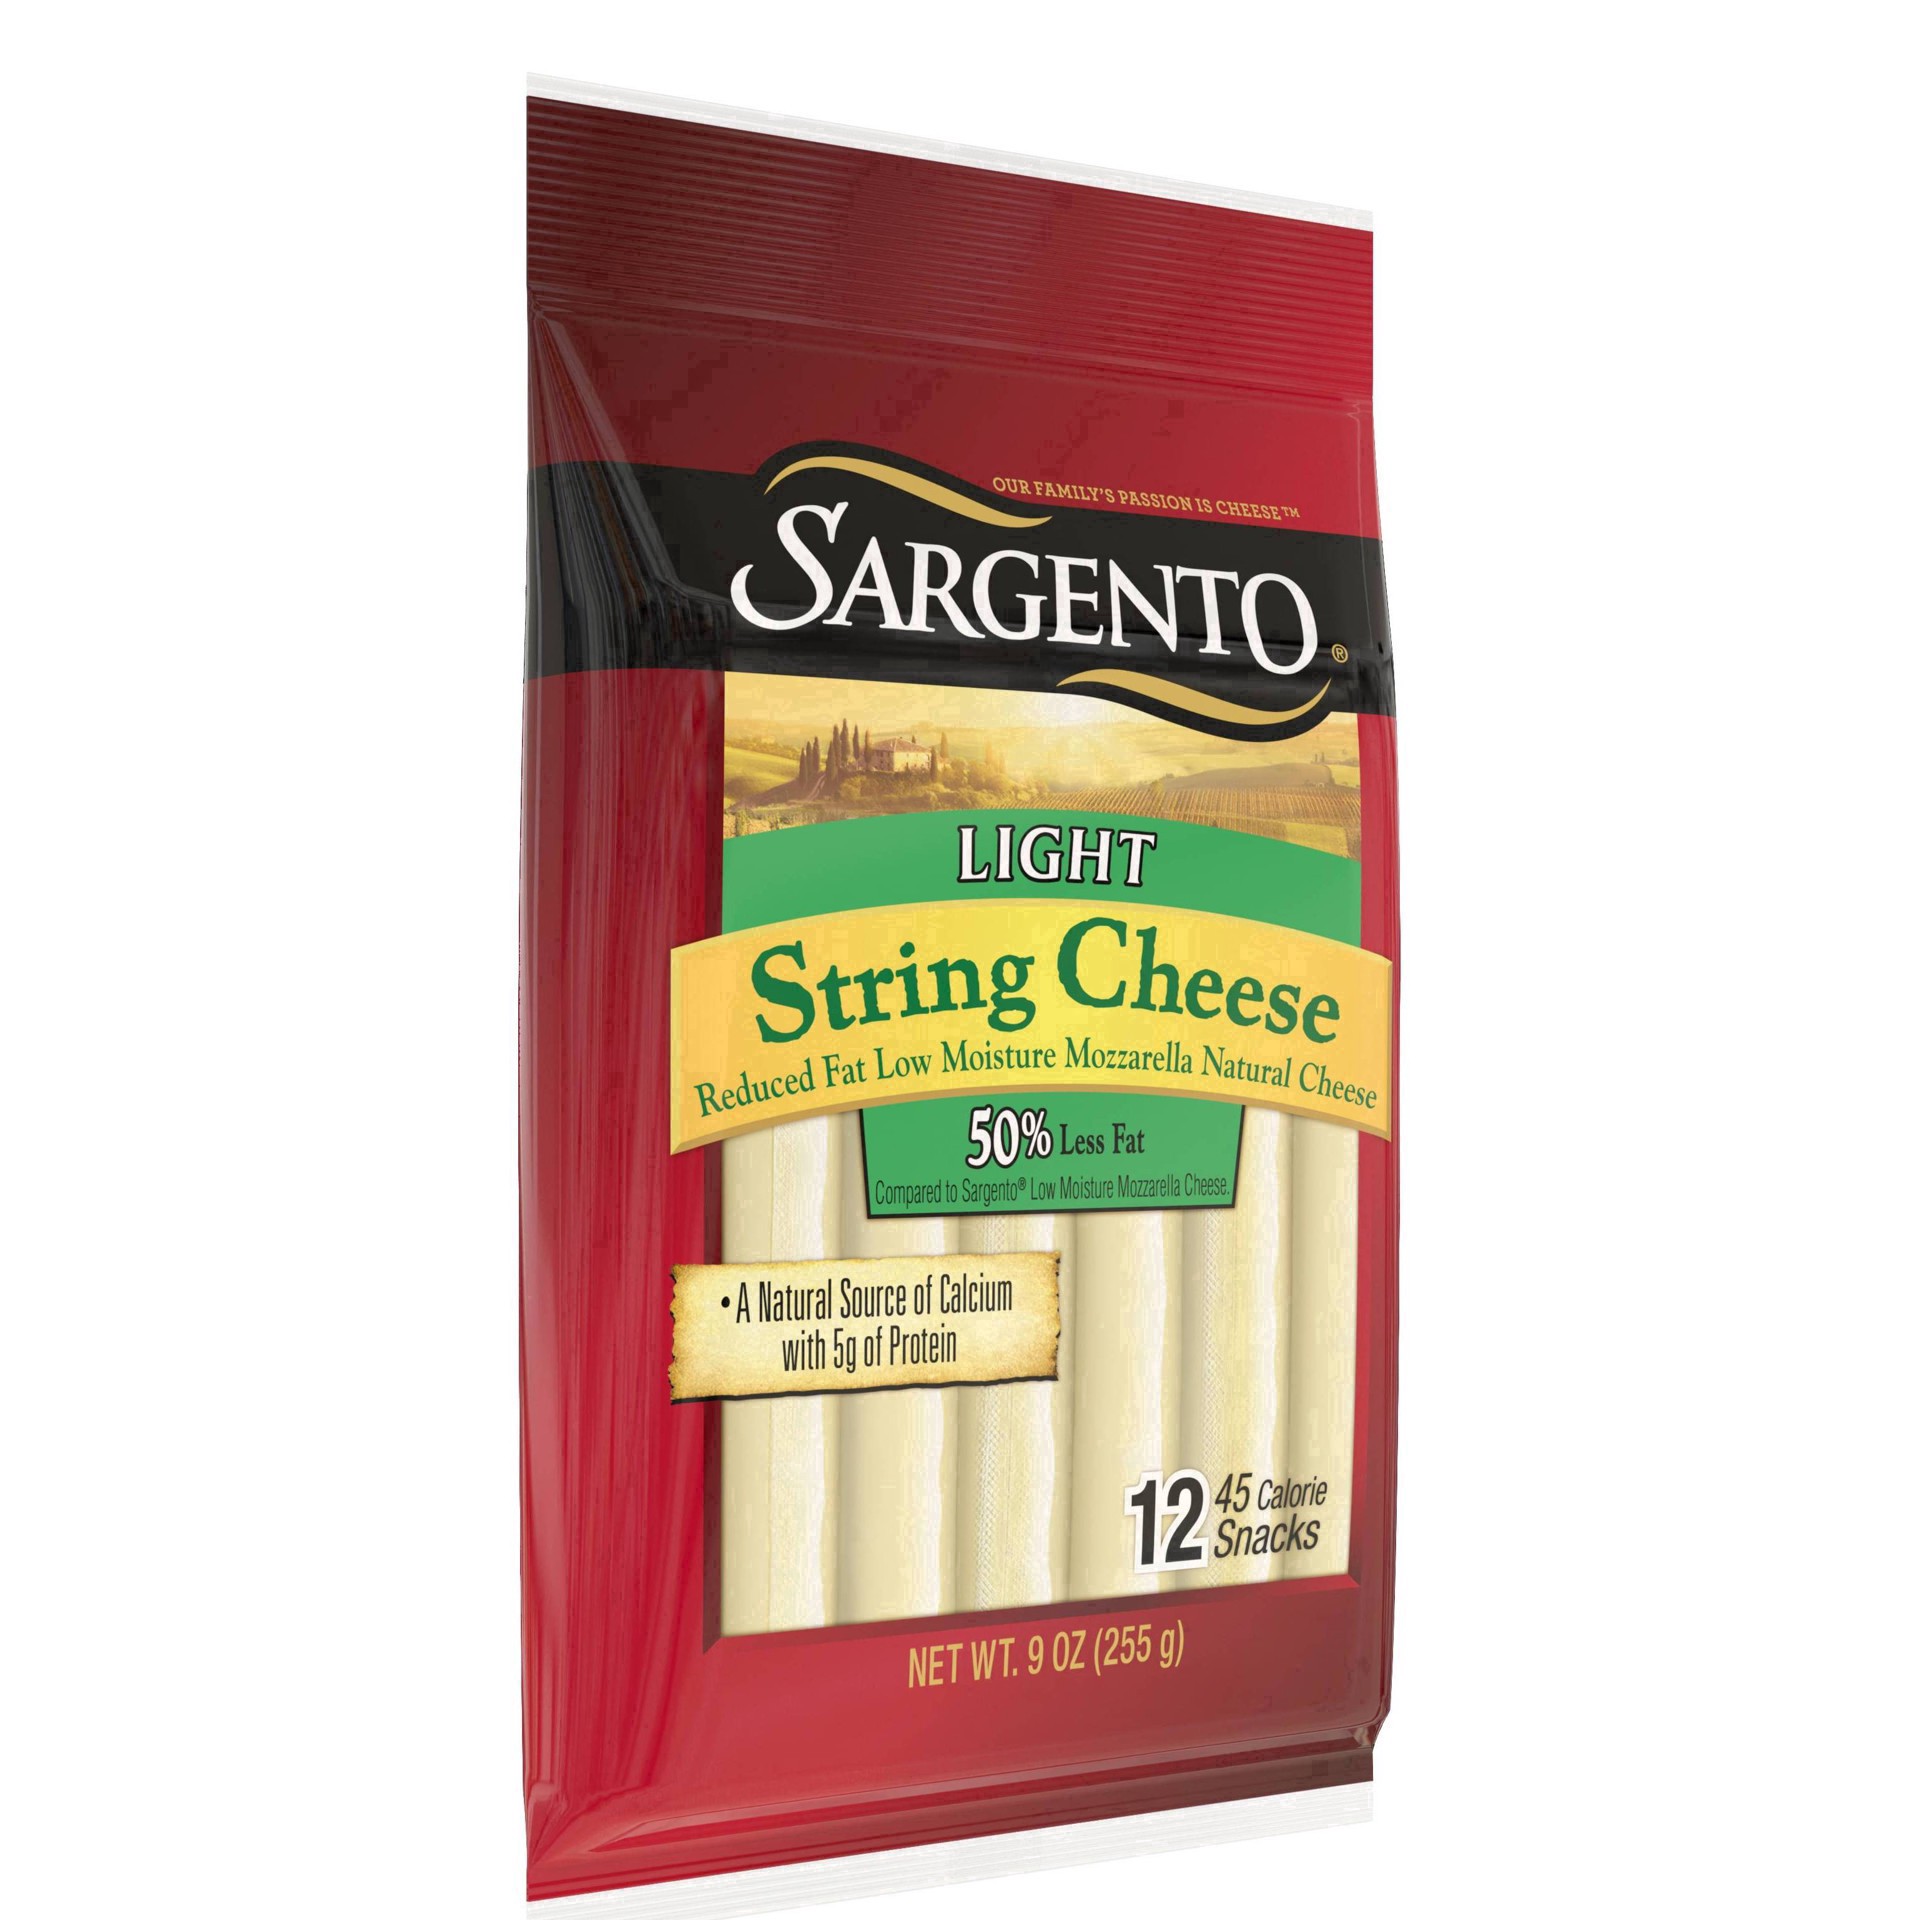 slide 3 of 62, Sargento Reduced Fat Low Moisture Part-Skim Mozzarella Natural Cheese Light String Cheese Snacks, 9 oz., 12-Count, 9 oz